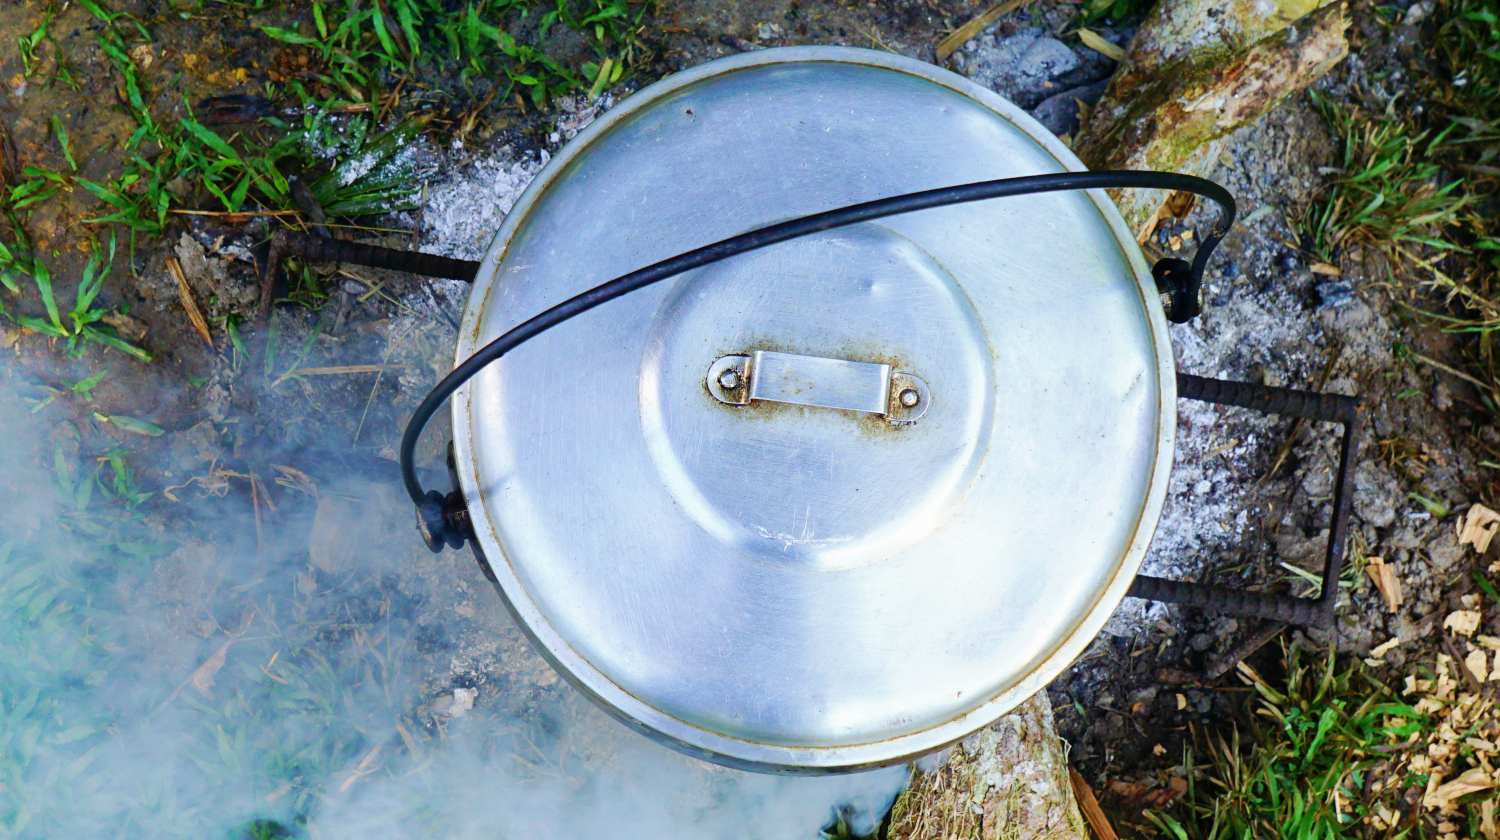 Featured | Cooking rice using cast-iron cauldron pot in outdoor | Make A Survival Cooking Kit From A Zebra Pot